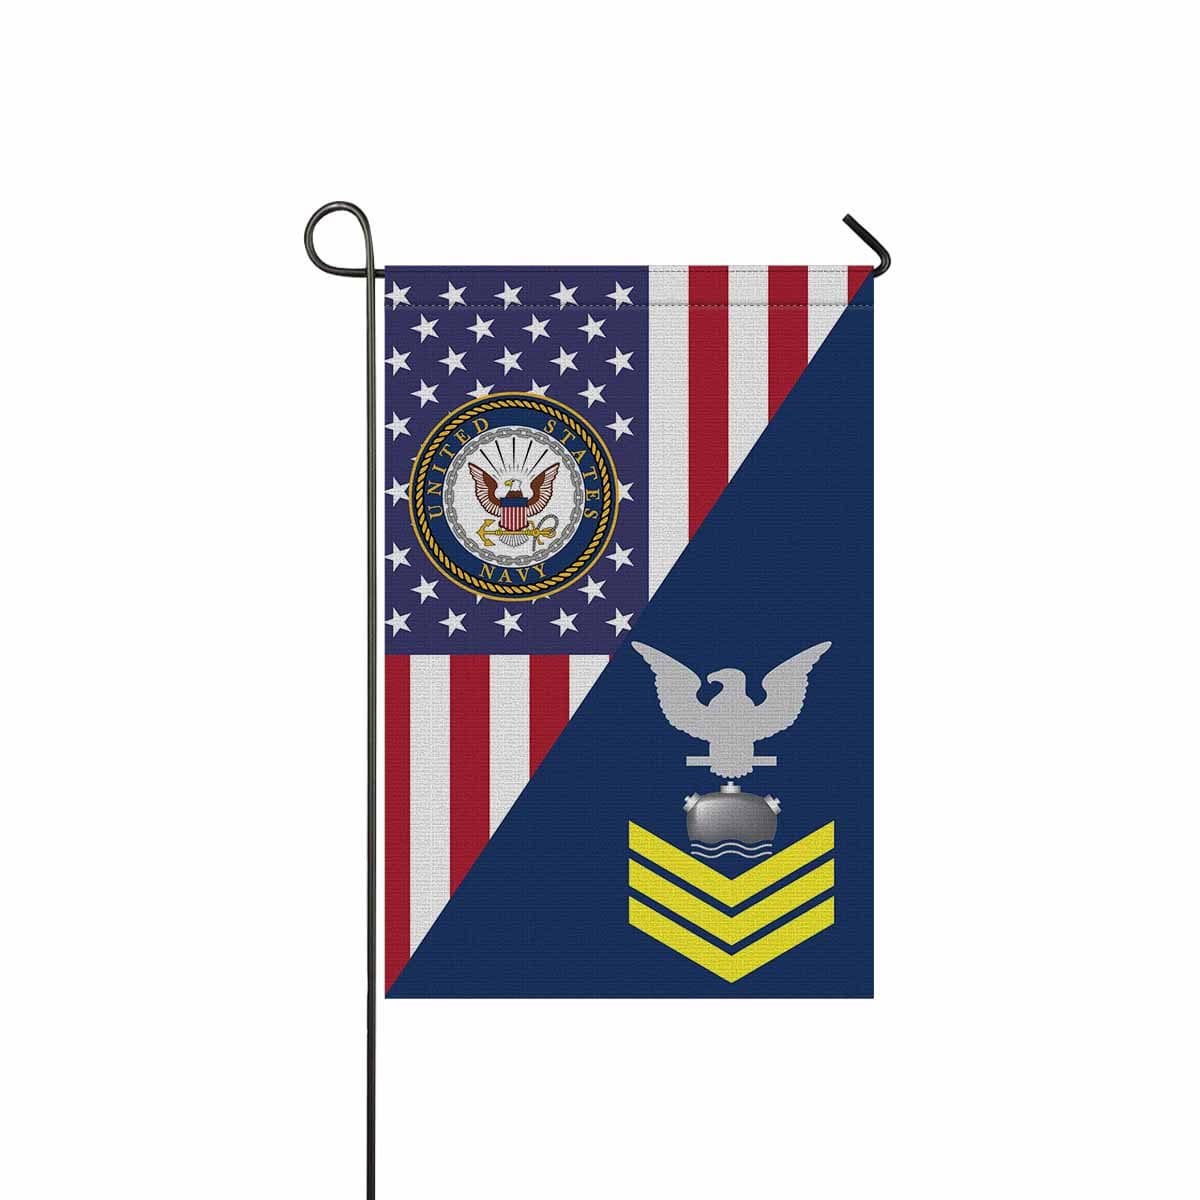 Navy Mineman Navy MN E-6 Gold Stripe Garden Flag/Yard Flag 12 inches x 18 inches Twin-Side Printing-GDFlag-Navy-Rating-Veterans Nation